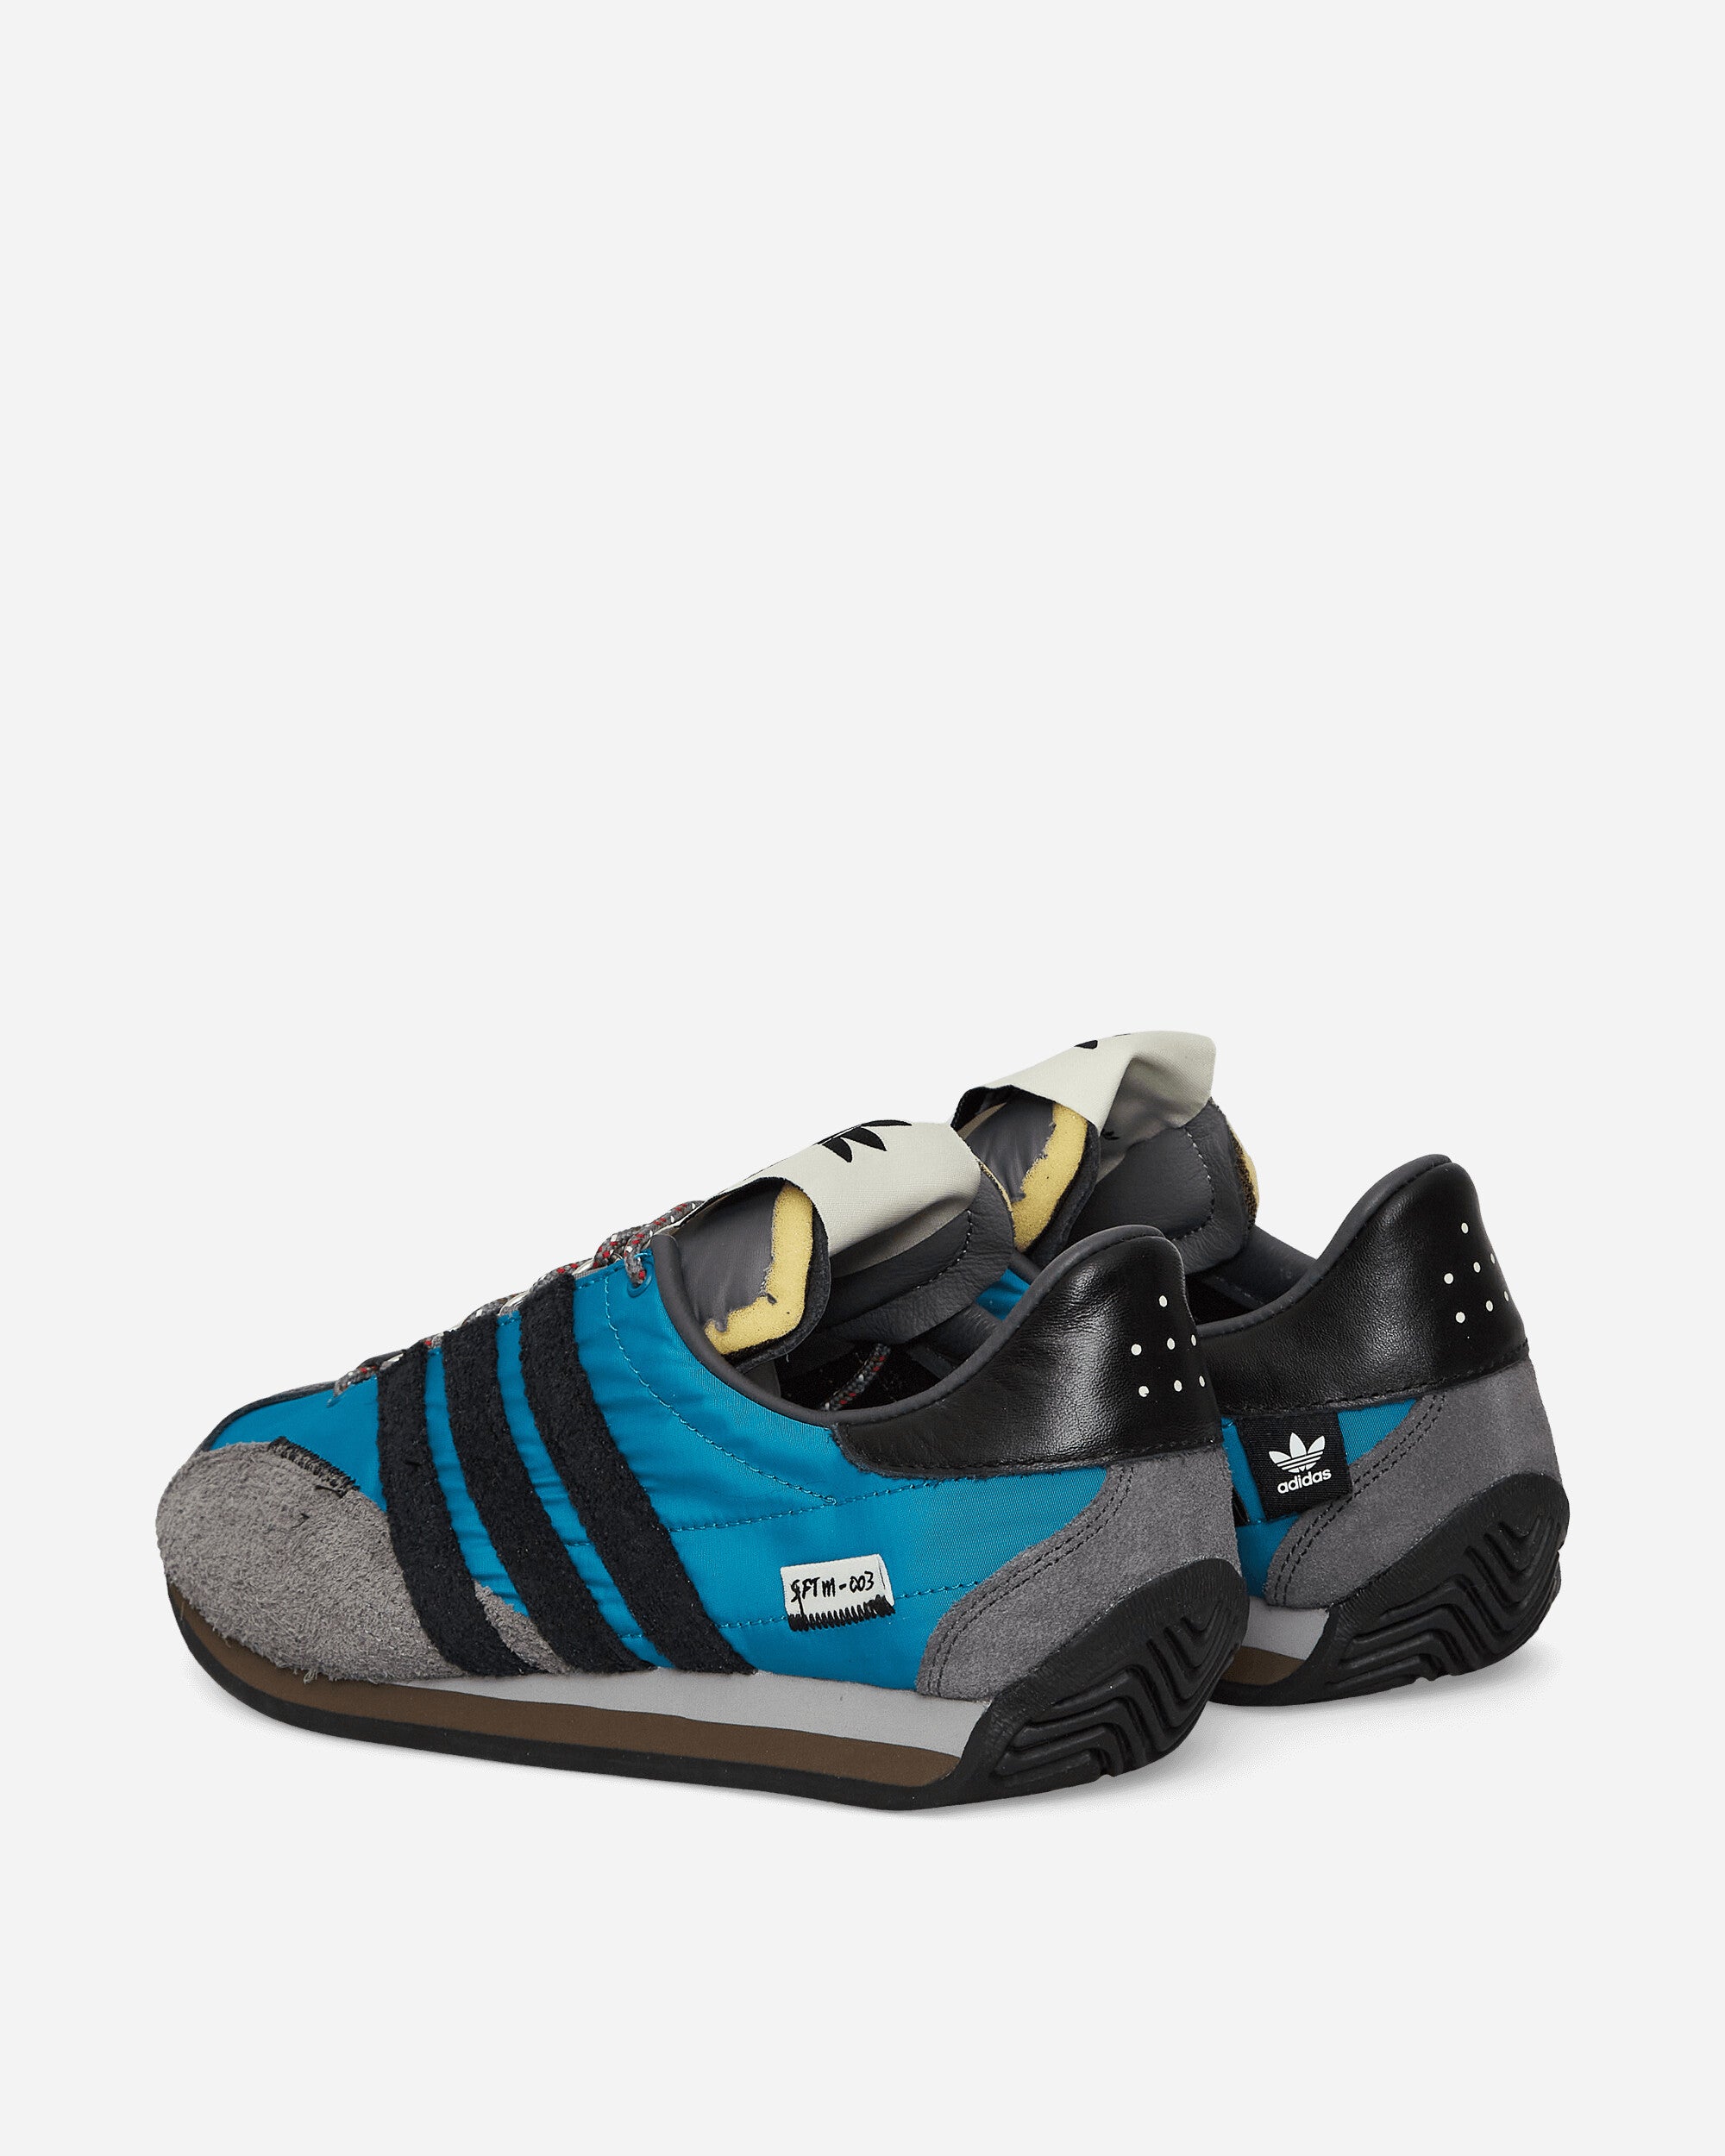 adidas Country Og Sftm Active Teal/Core Black Sneakers Low ID3545 001